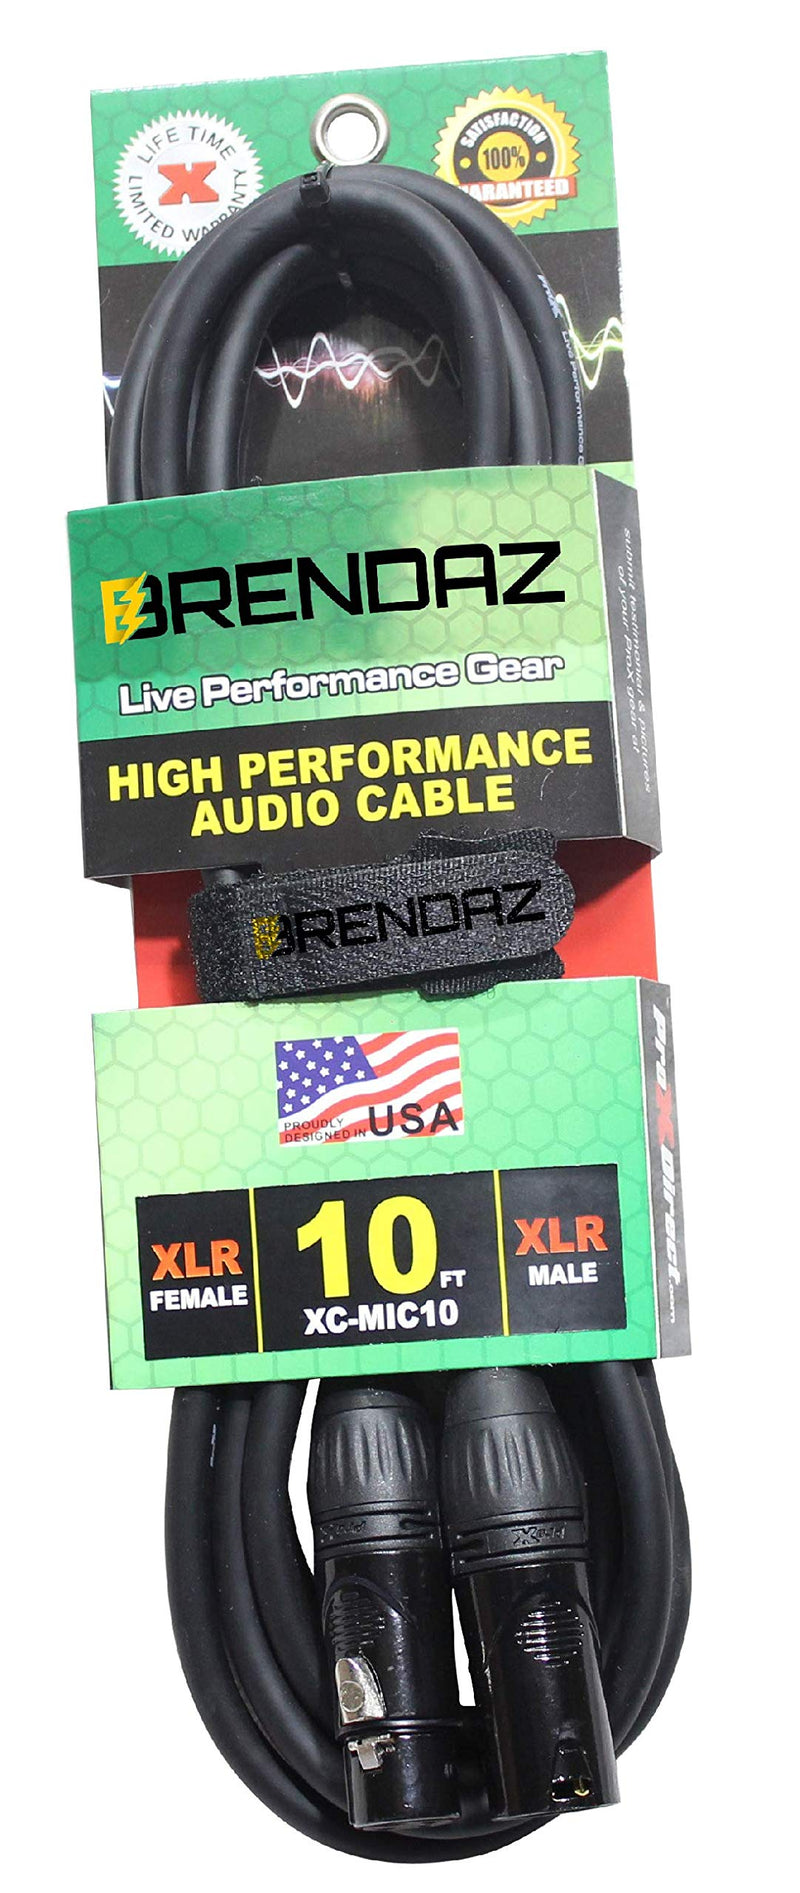 BRENDAZ Balanced XLR Female to XLR Male 3-Pin High Performance Pro Microphone Cable Compatible with Shure SM58-LC, SM58S, SM57-LC, SM7B Vocal Microphone (10-Feet) 10-Feet